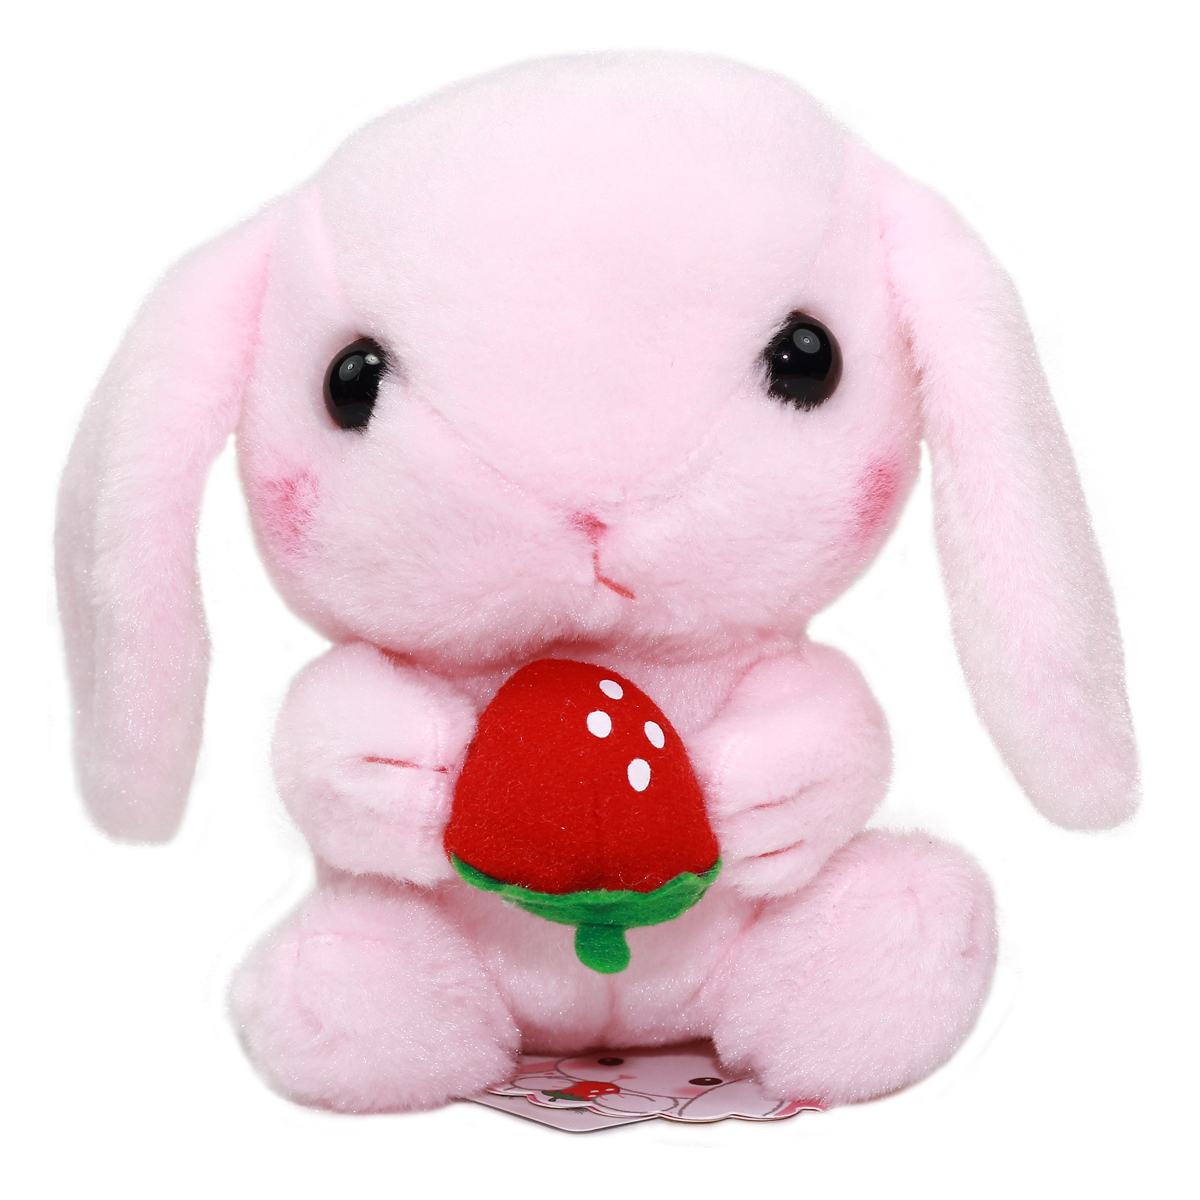 Amuse Bunny Plush Doll Sweet Garden Collection Cute Stuffed Animal Toy Pink 6 Inches